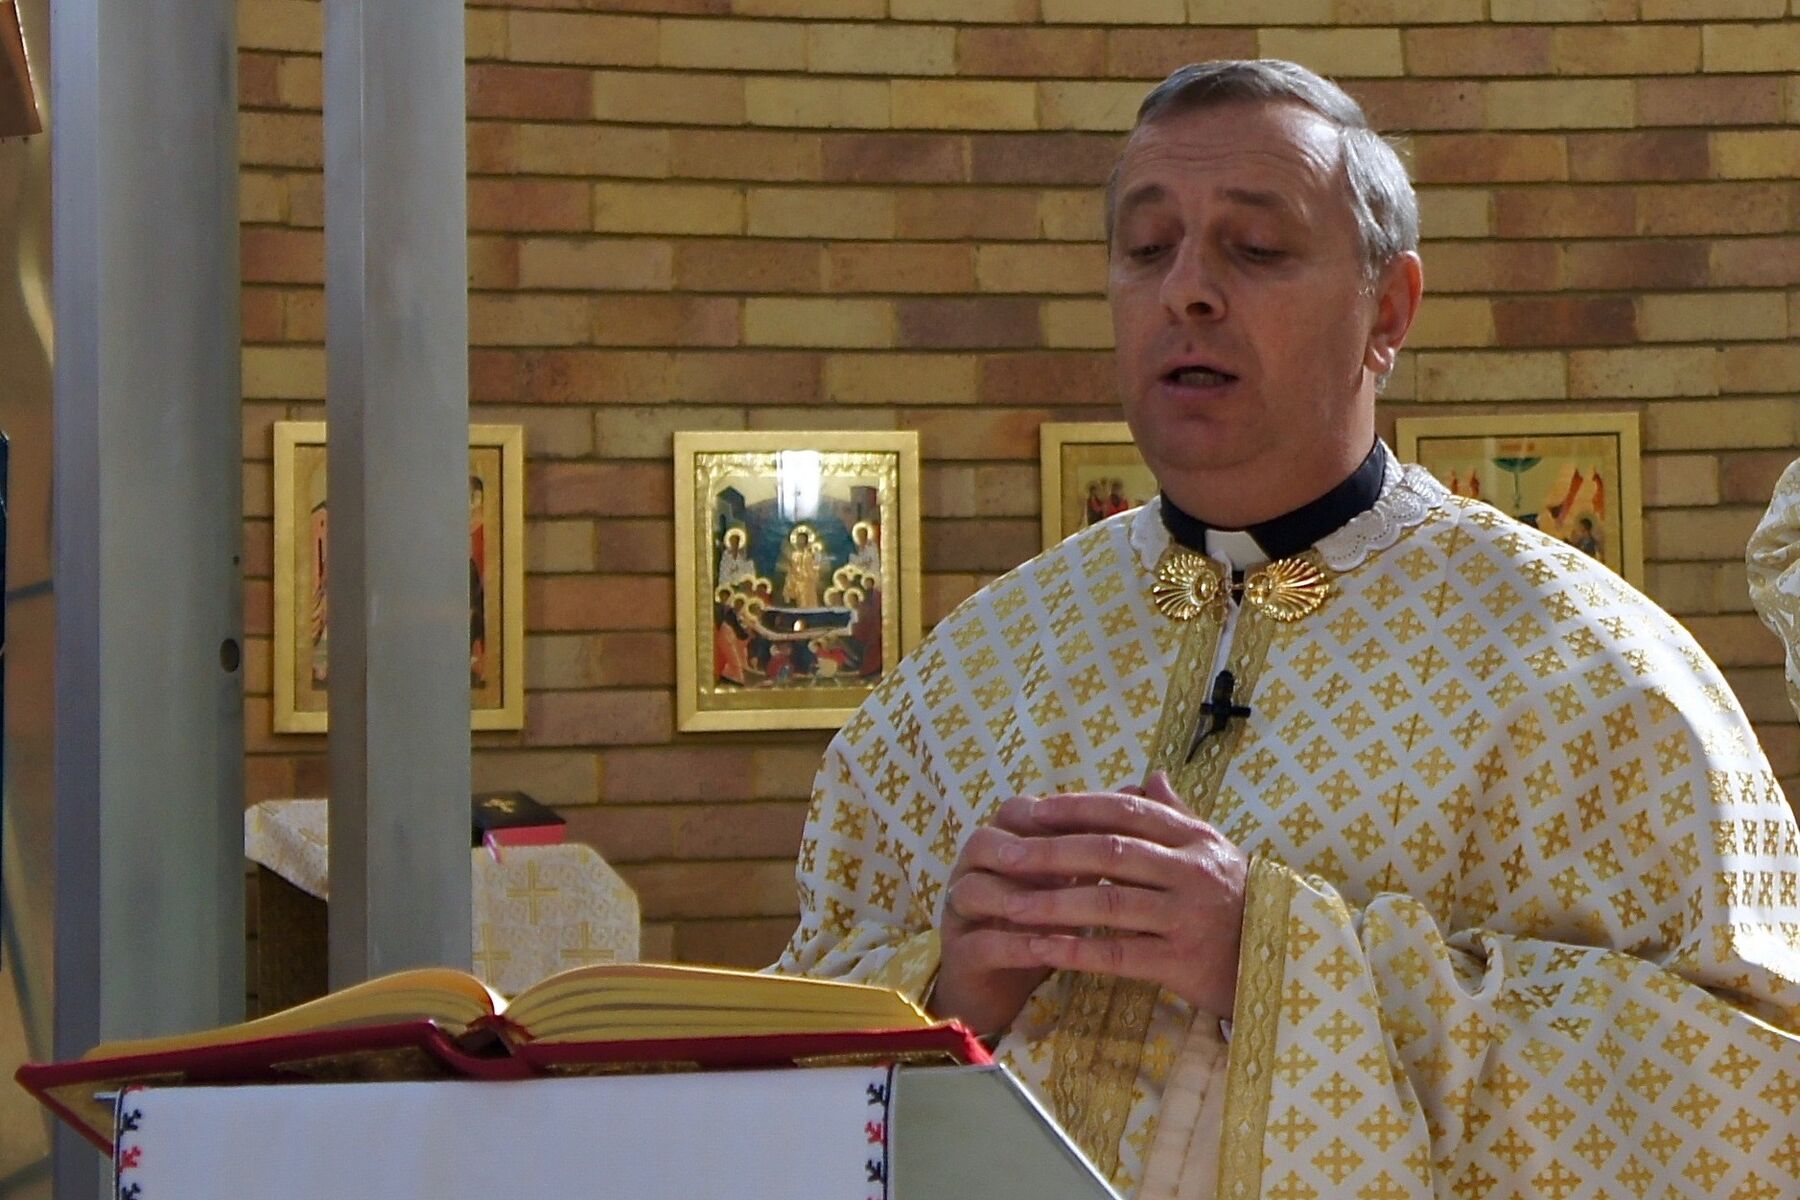 Homily by Fr. Oleh Stefanyshyn on the Tenth Sunday after Pentecost